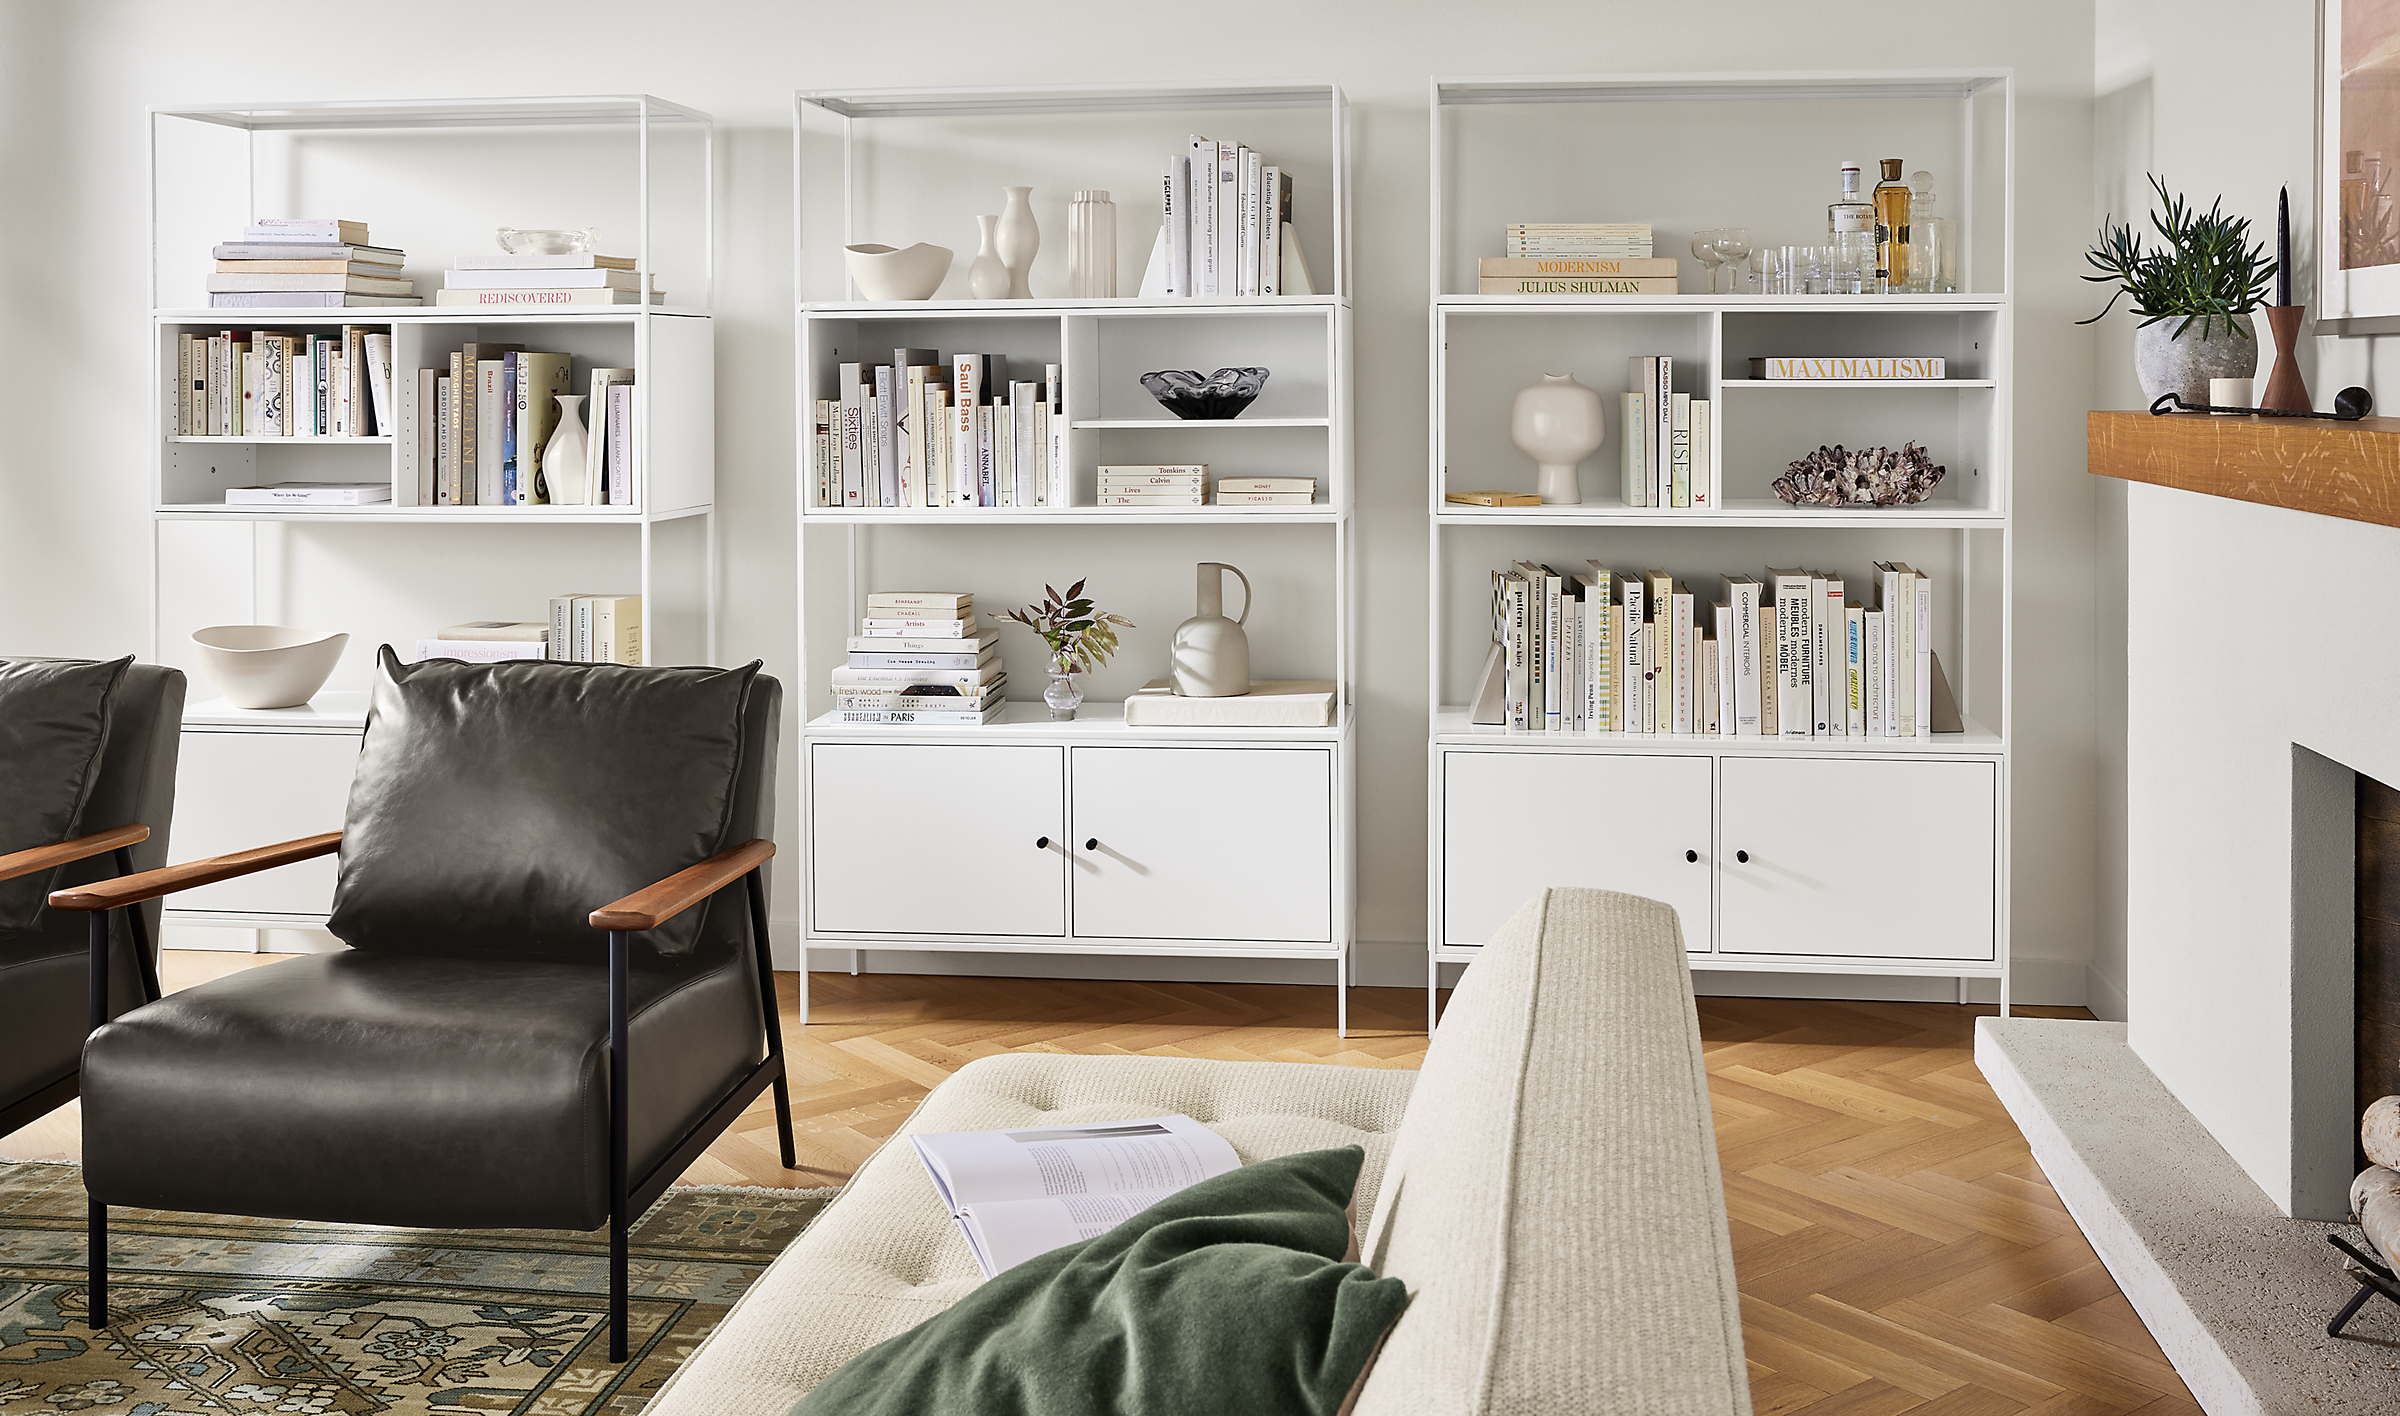 Living room with 3 slim 42 wide bookcases in white, Xavier chair in Palermo Charcoal leather, and Kayseri rug in Moss.